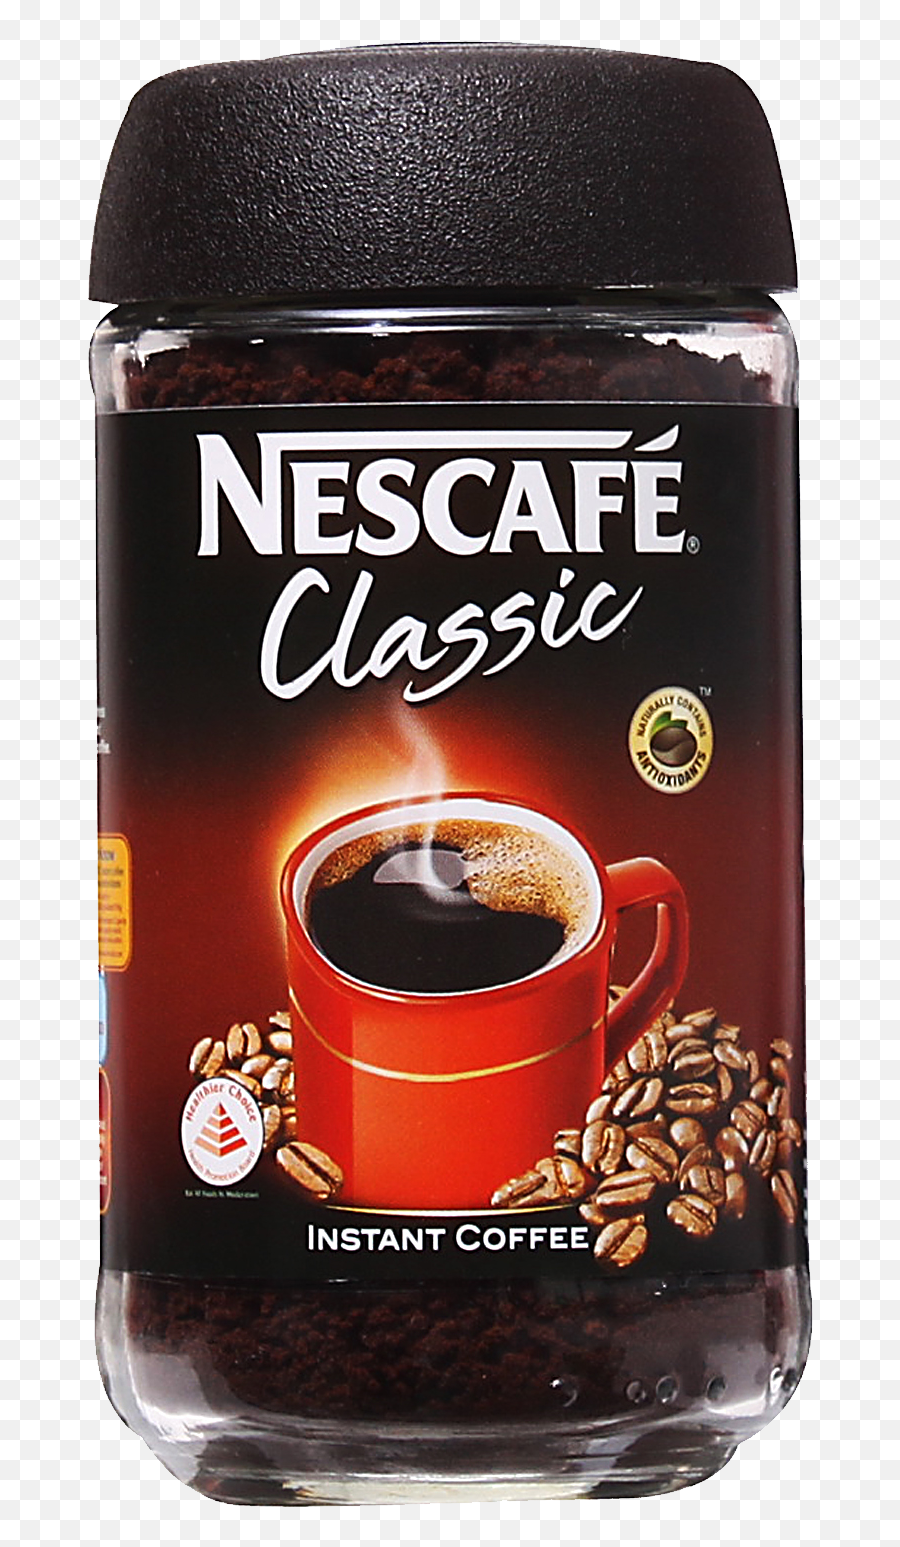 39 Coffee Jar Png Images Are Free To Download - Nescafe Classic Jar Png,Jar Png